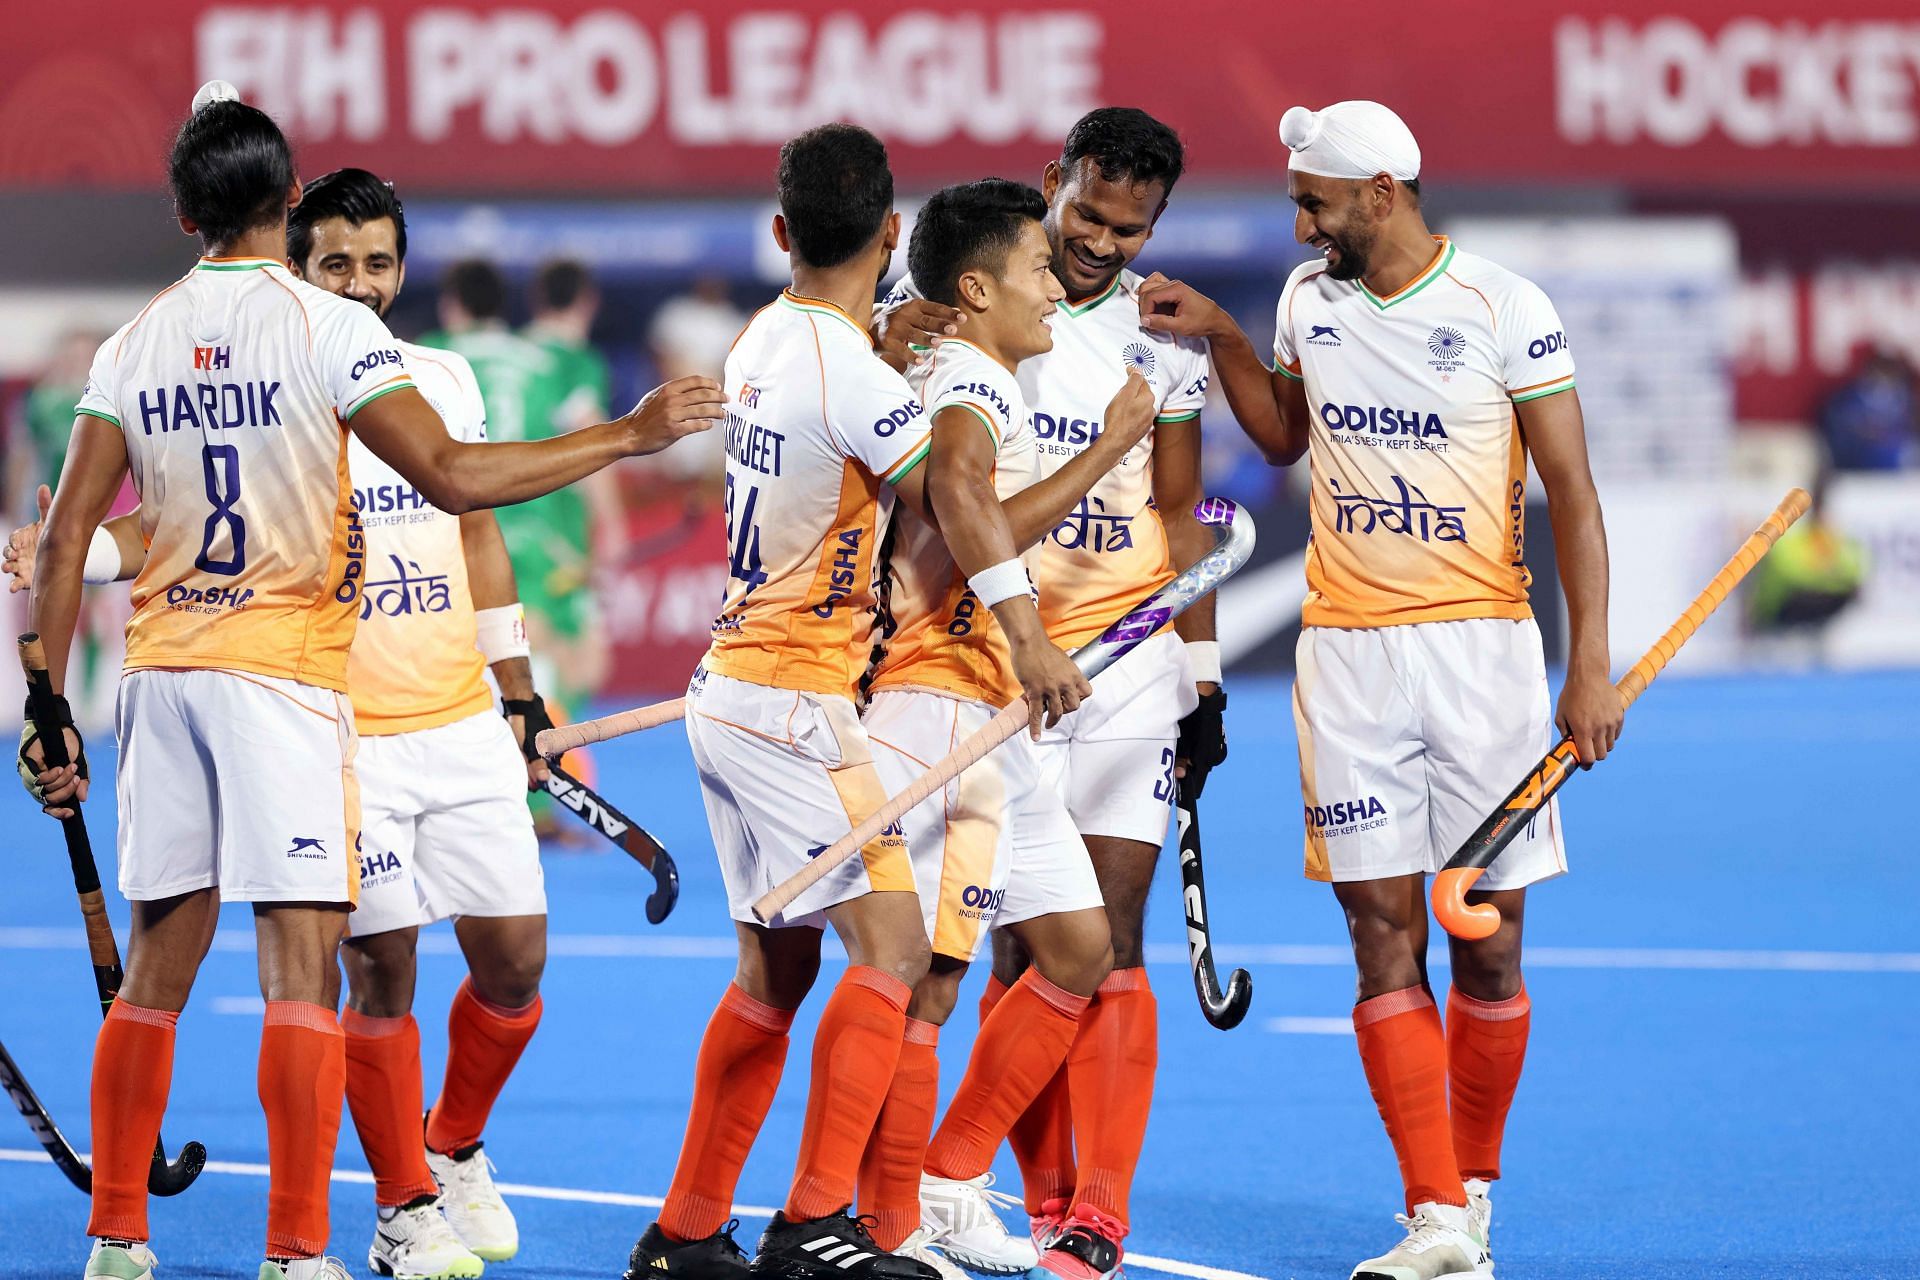 India are playing a more defensive brand of hockey in recent times